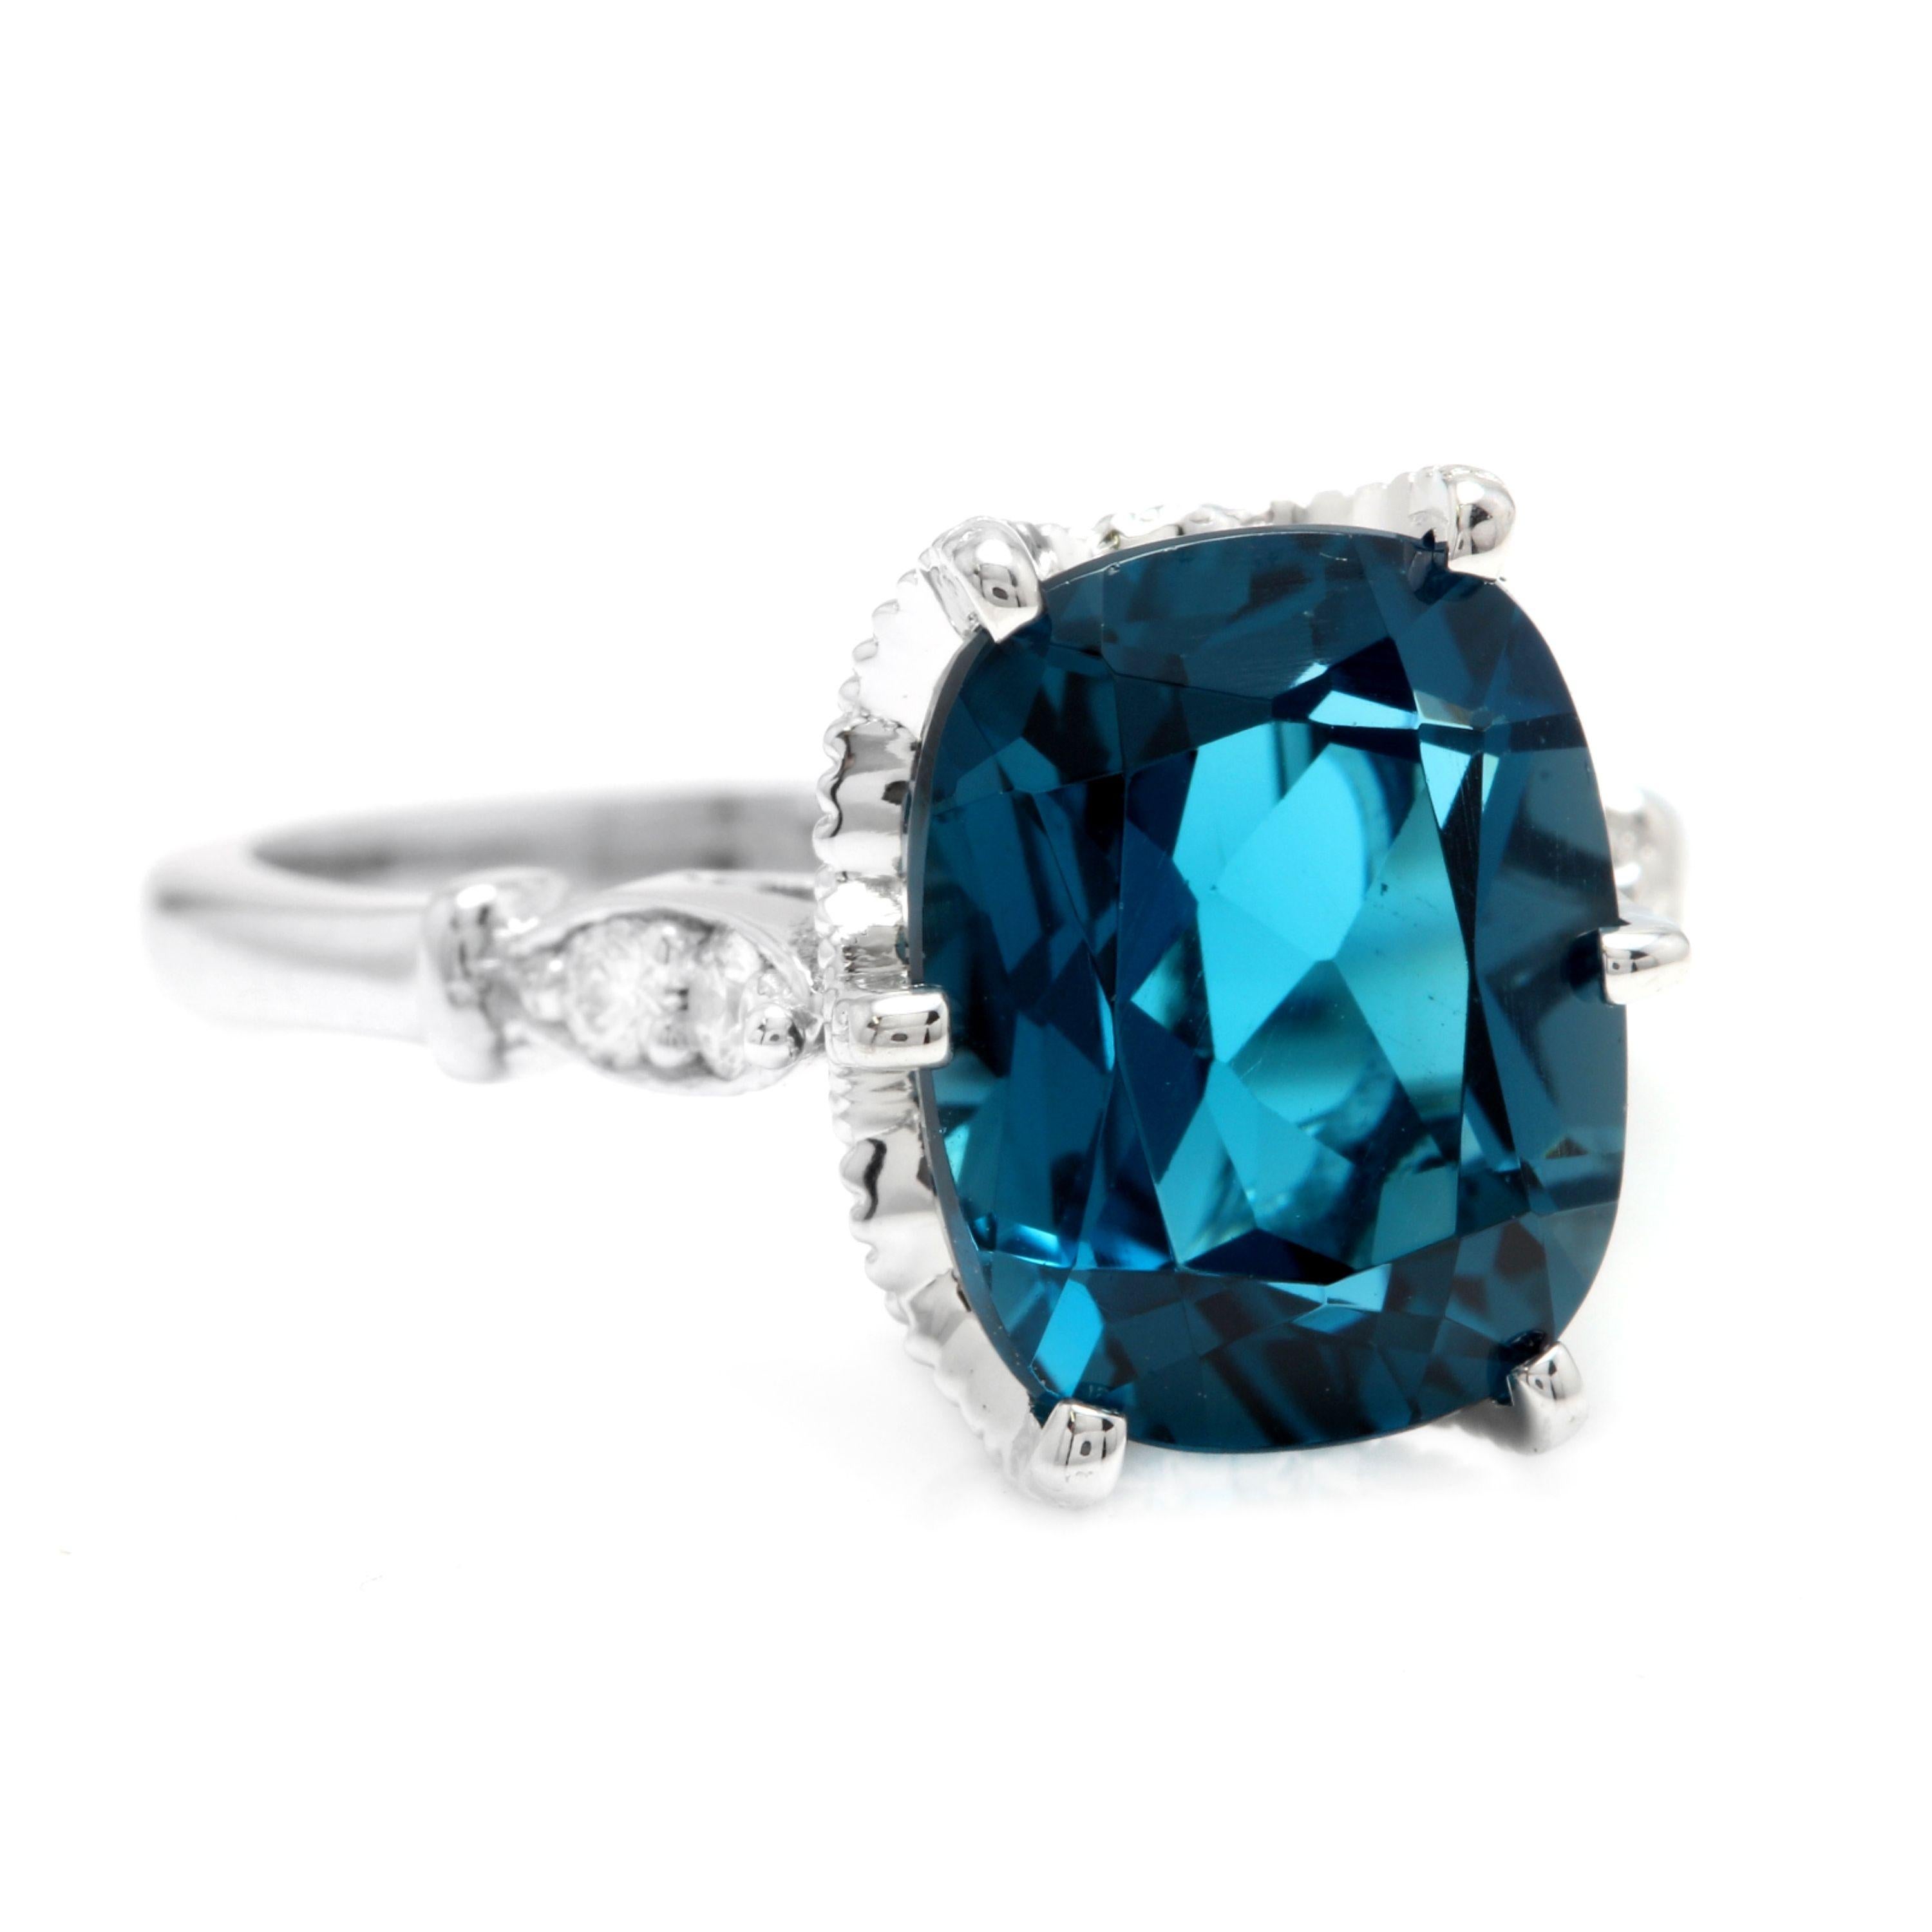 4.08 Carats Natural Impressive London Blue Topaz and Diamond 14K White Gold Ring

Total Natural London Blue Topaz Weight is: Approx. 4.00 Carats

London Blue Topaz Measures: Approx. 10.00mm x 8.00mm

Natural Round Diamonds Weight: Approx. 0.08